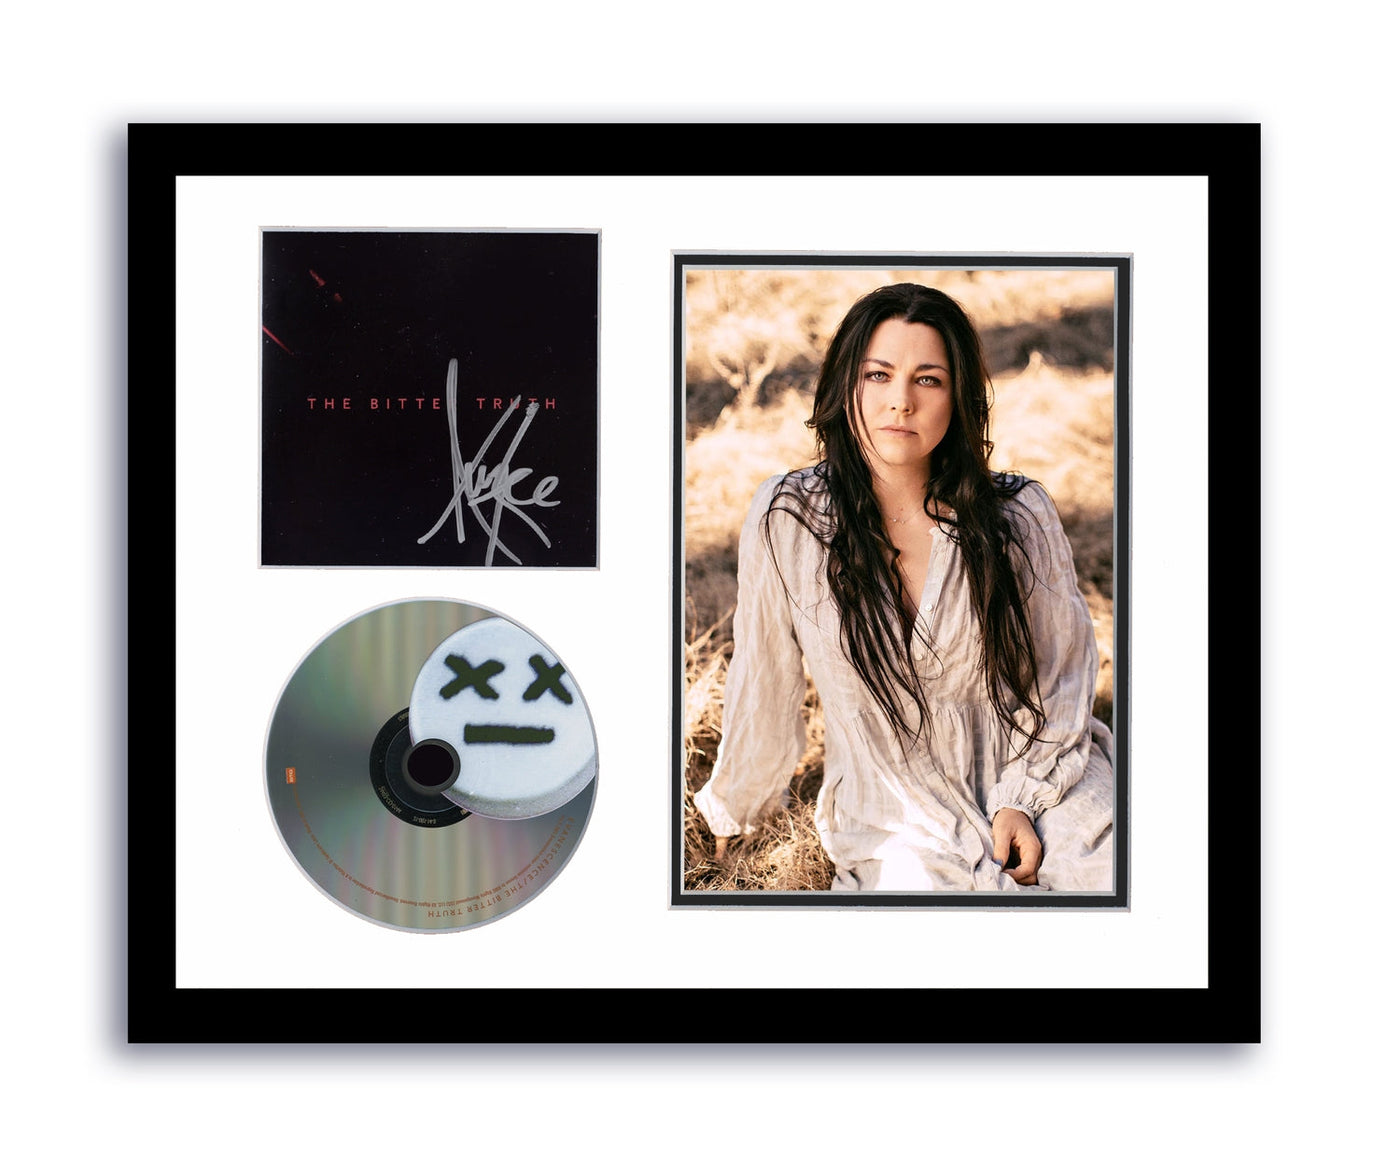 Evanescence Amy Lee Autographed 11x14 Custom Framed CD Photo Bitter Truth Signed ACOA 15